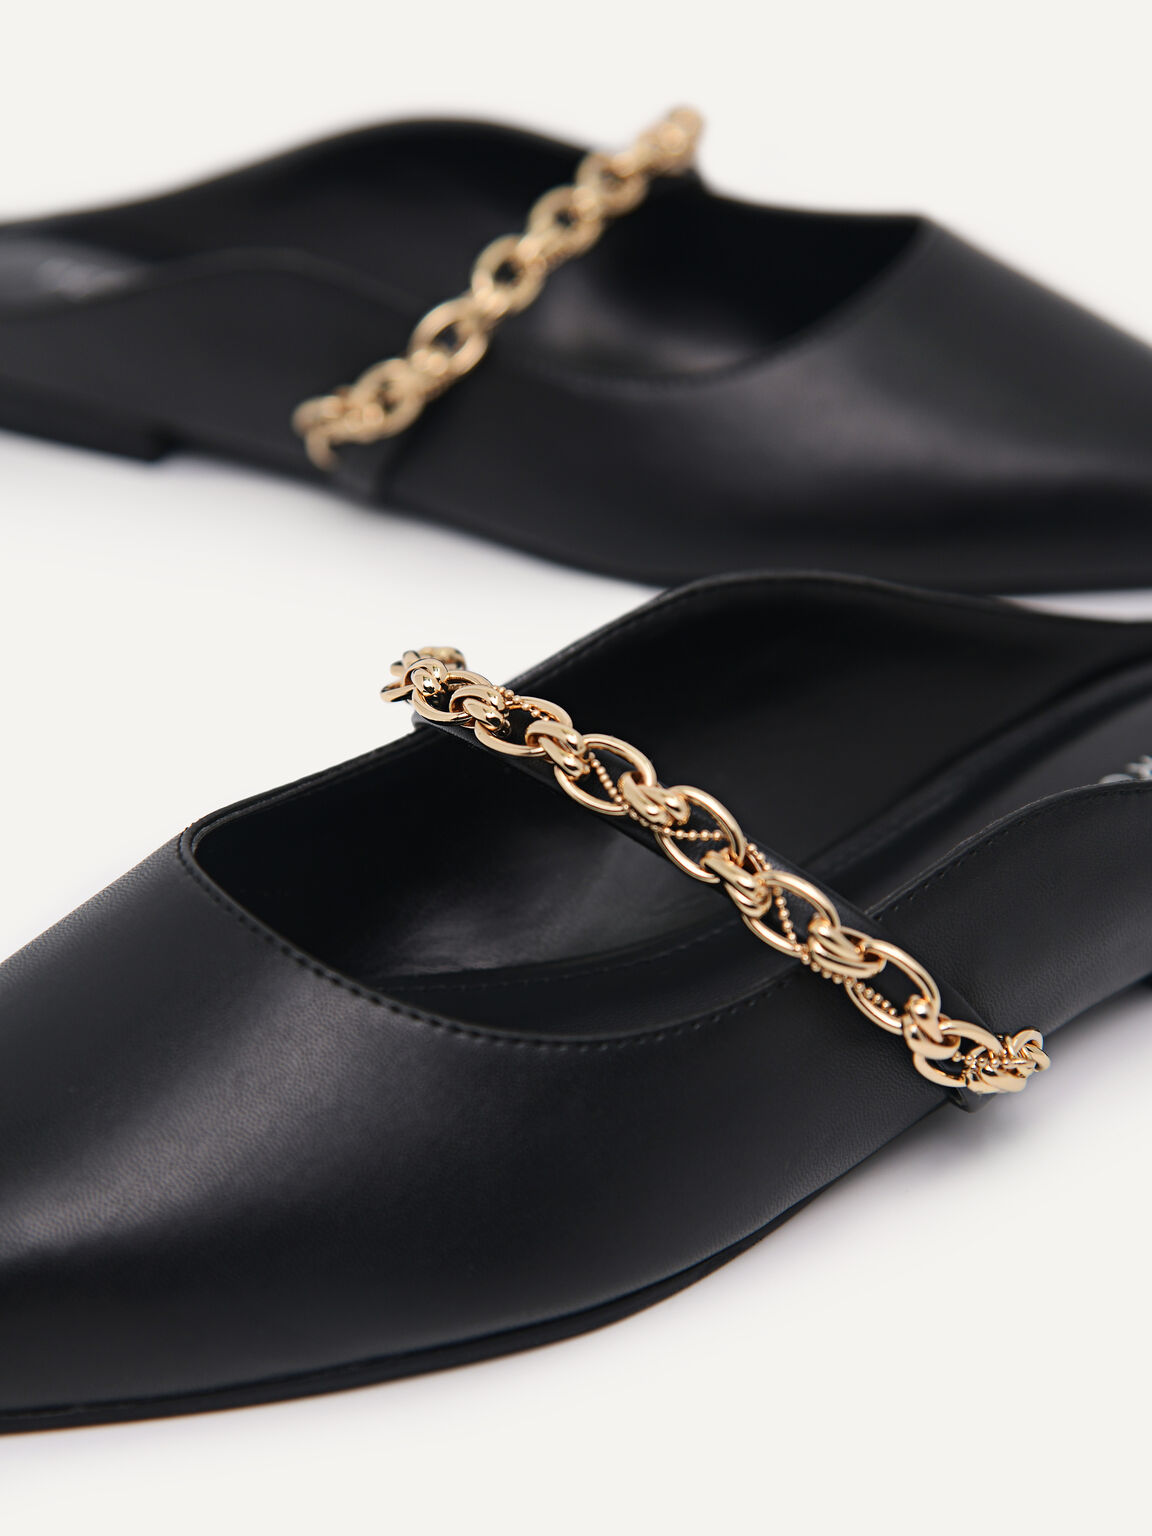 Mules with Chain Strap, Black